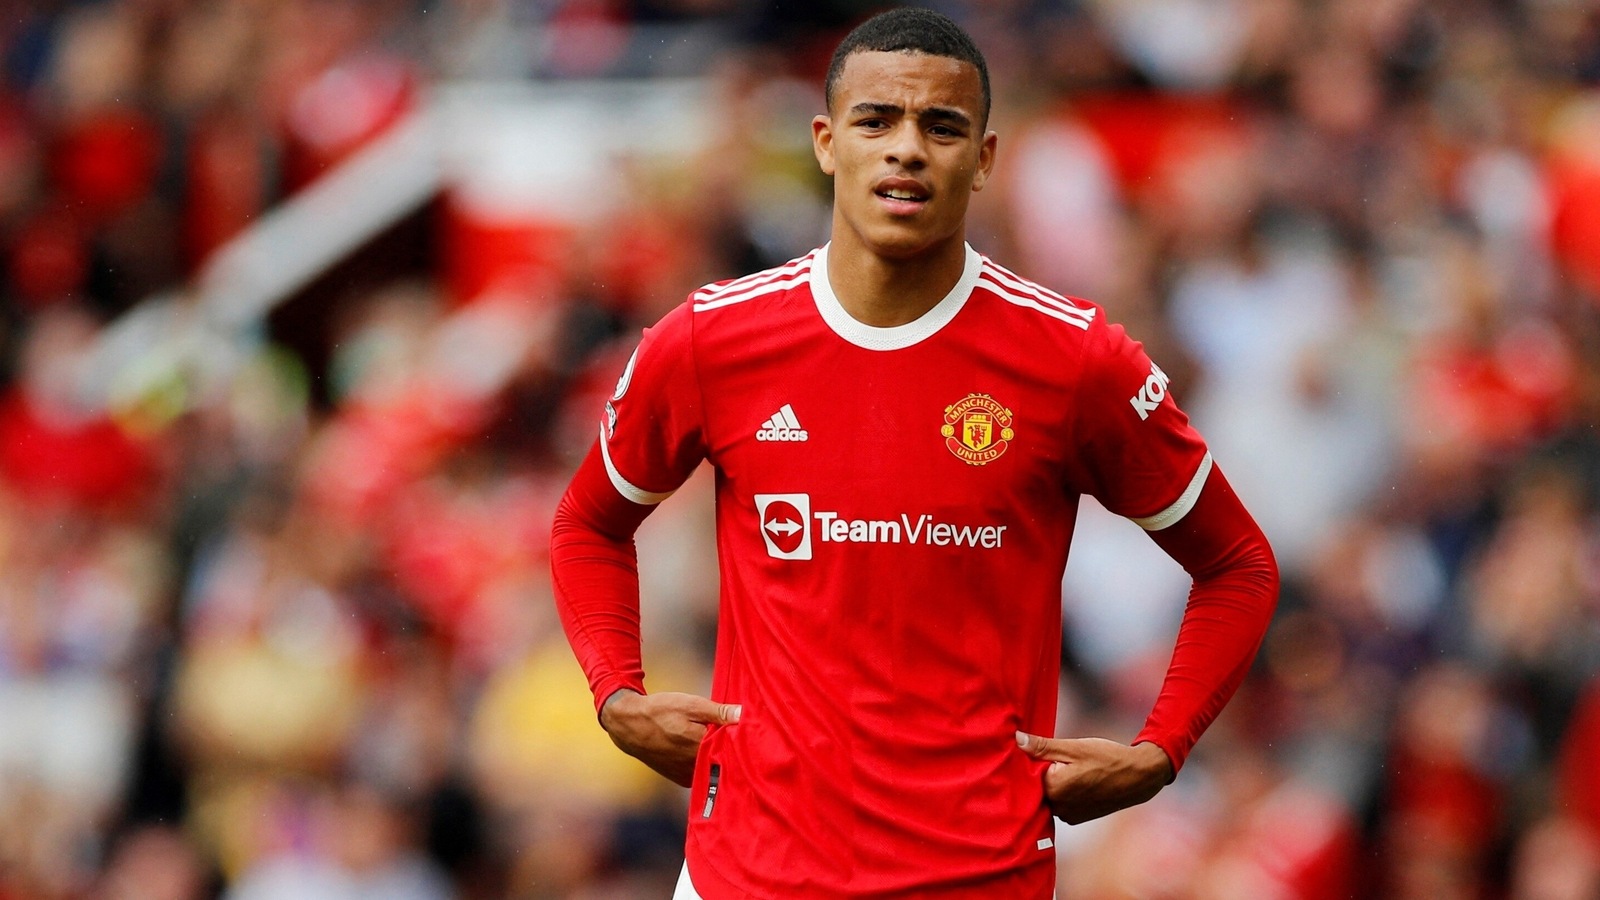 manchester-united-player-mason-greenwood-granted-bail-after-rape-charge